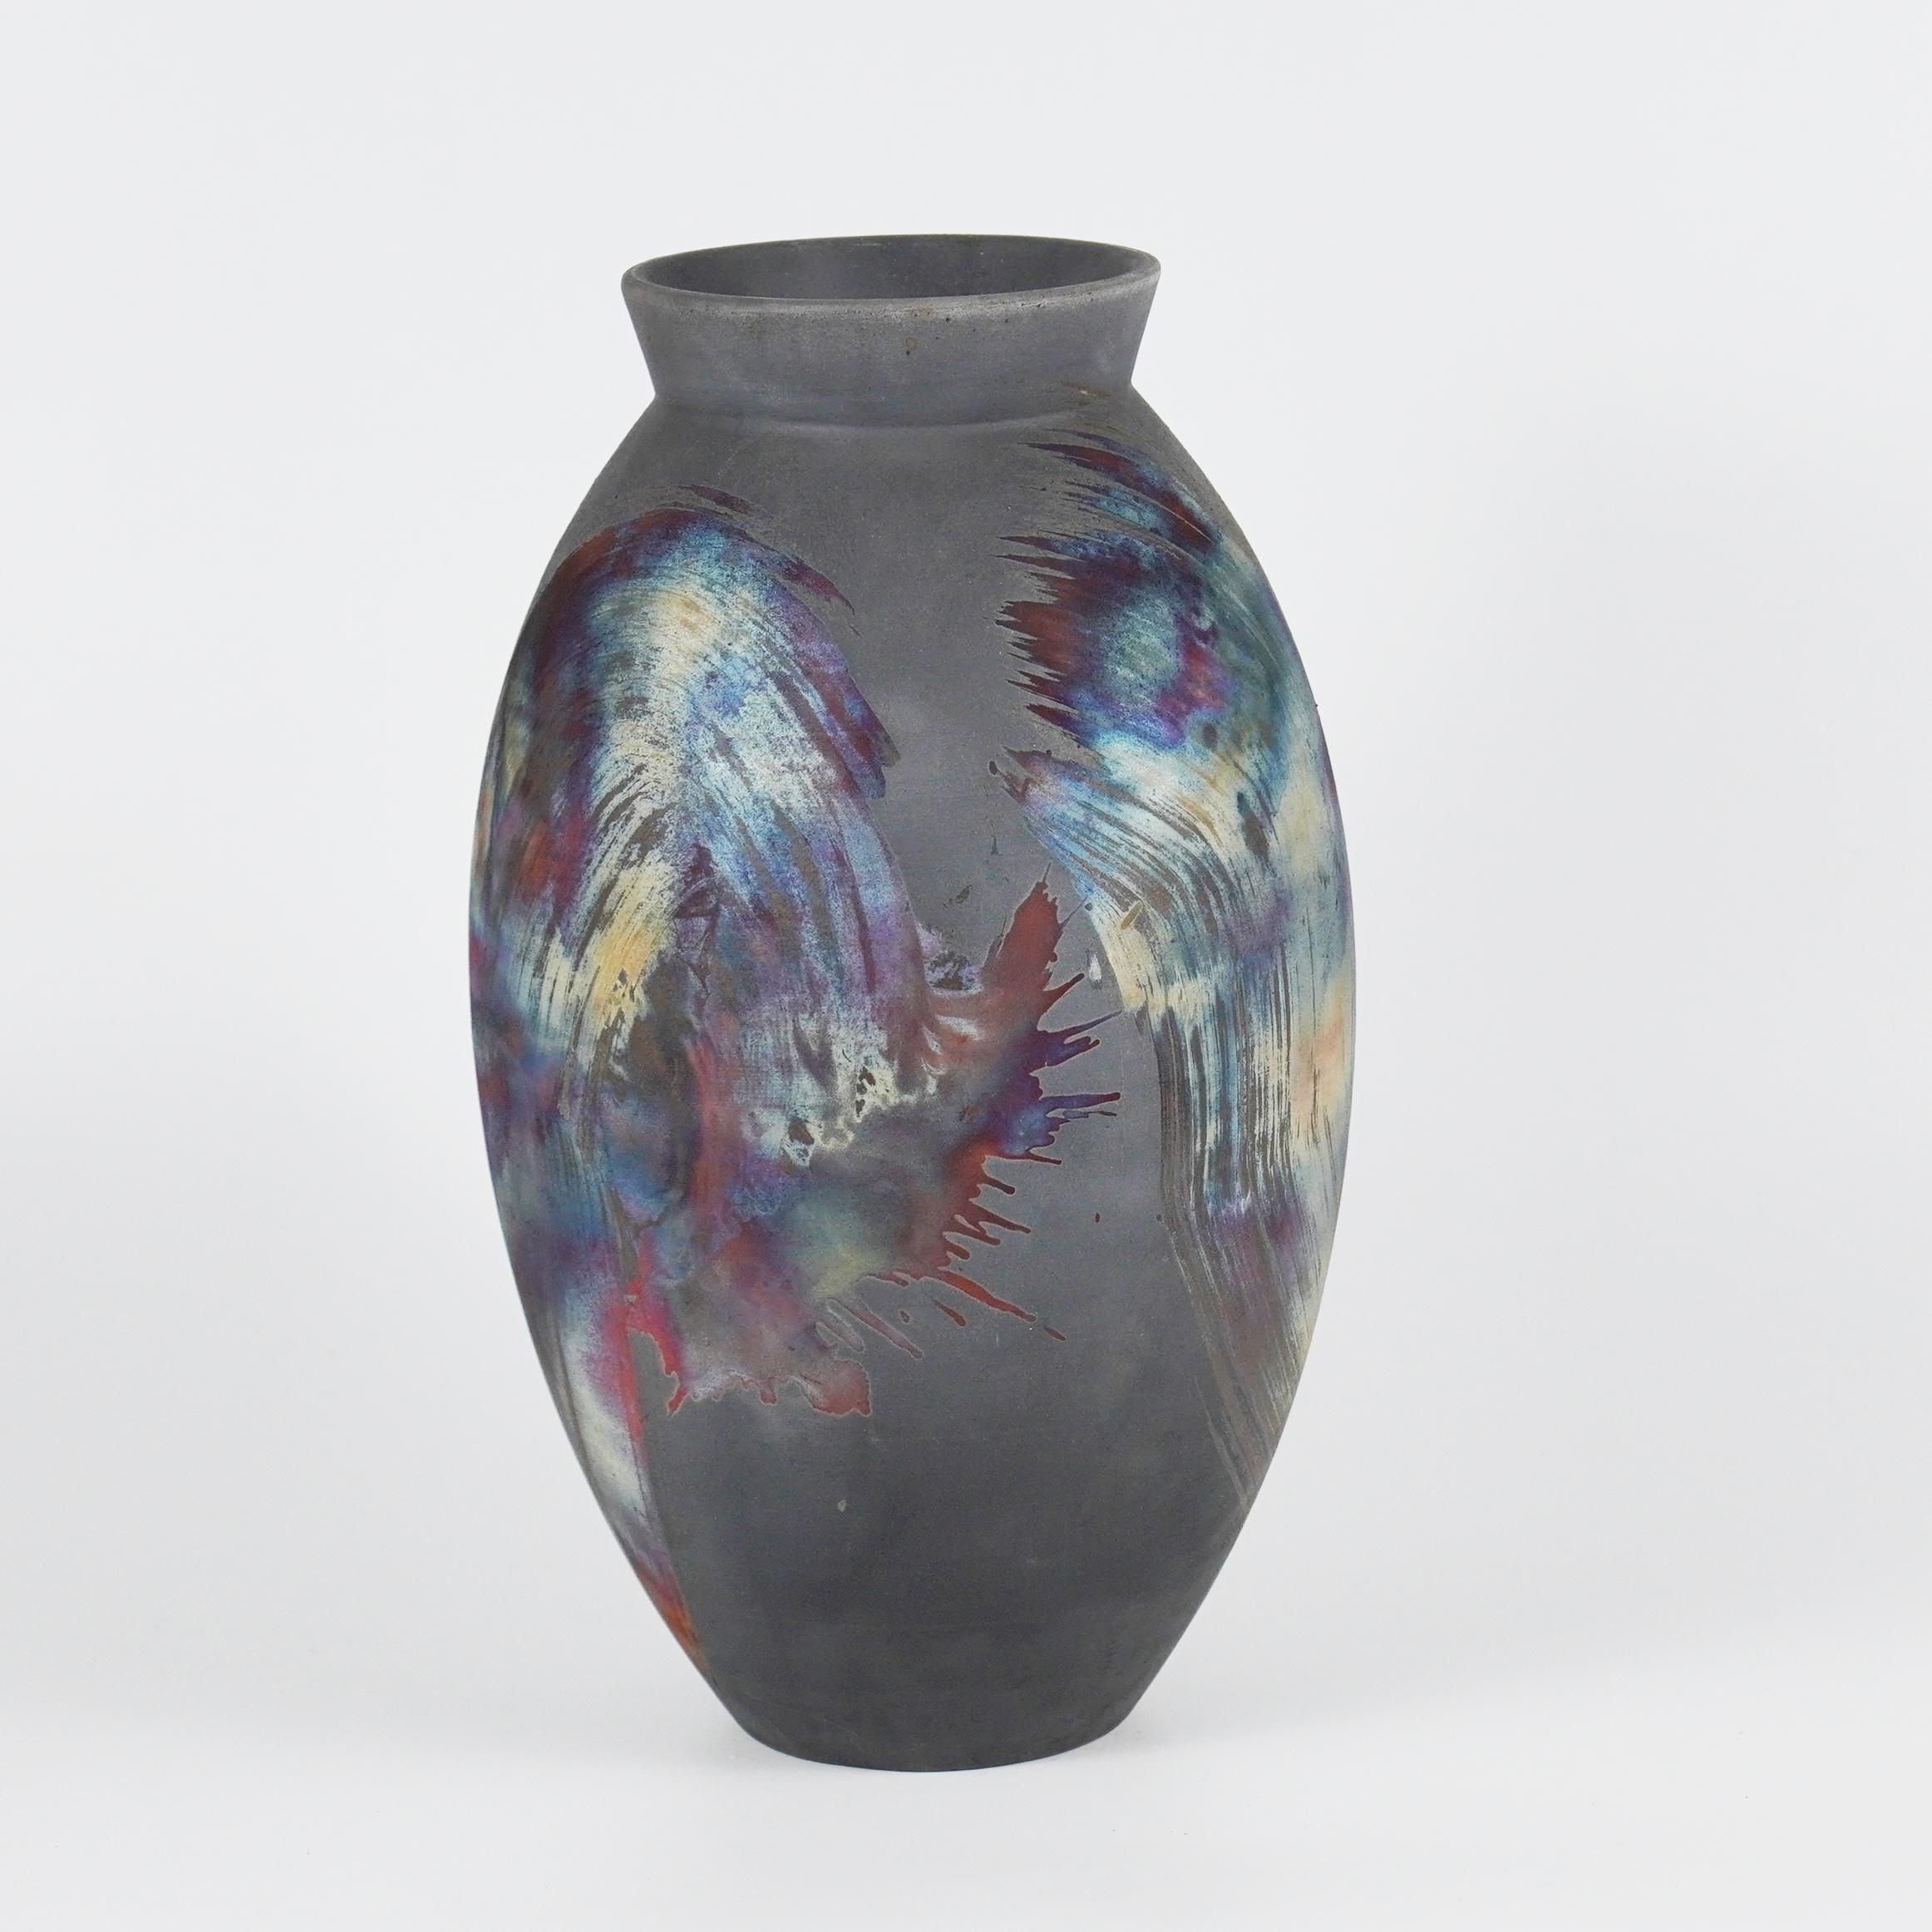 A mesmerizing sight to behold as soon as the rainbow-like patinas catch your eye. The oval vase is a tall, teardrop-shaped design best for adding a touch of elegance and intrigue to an interior space. Made using the Raku technique, it easily becomes